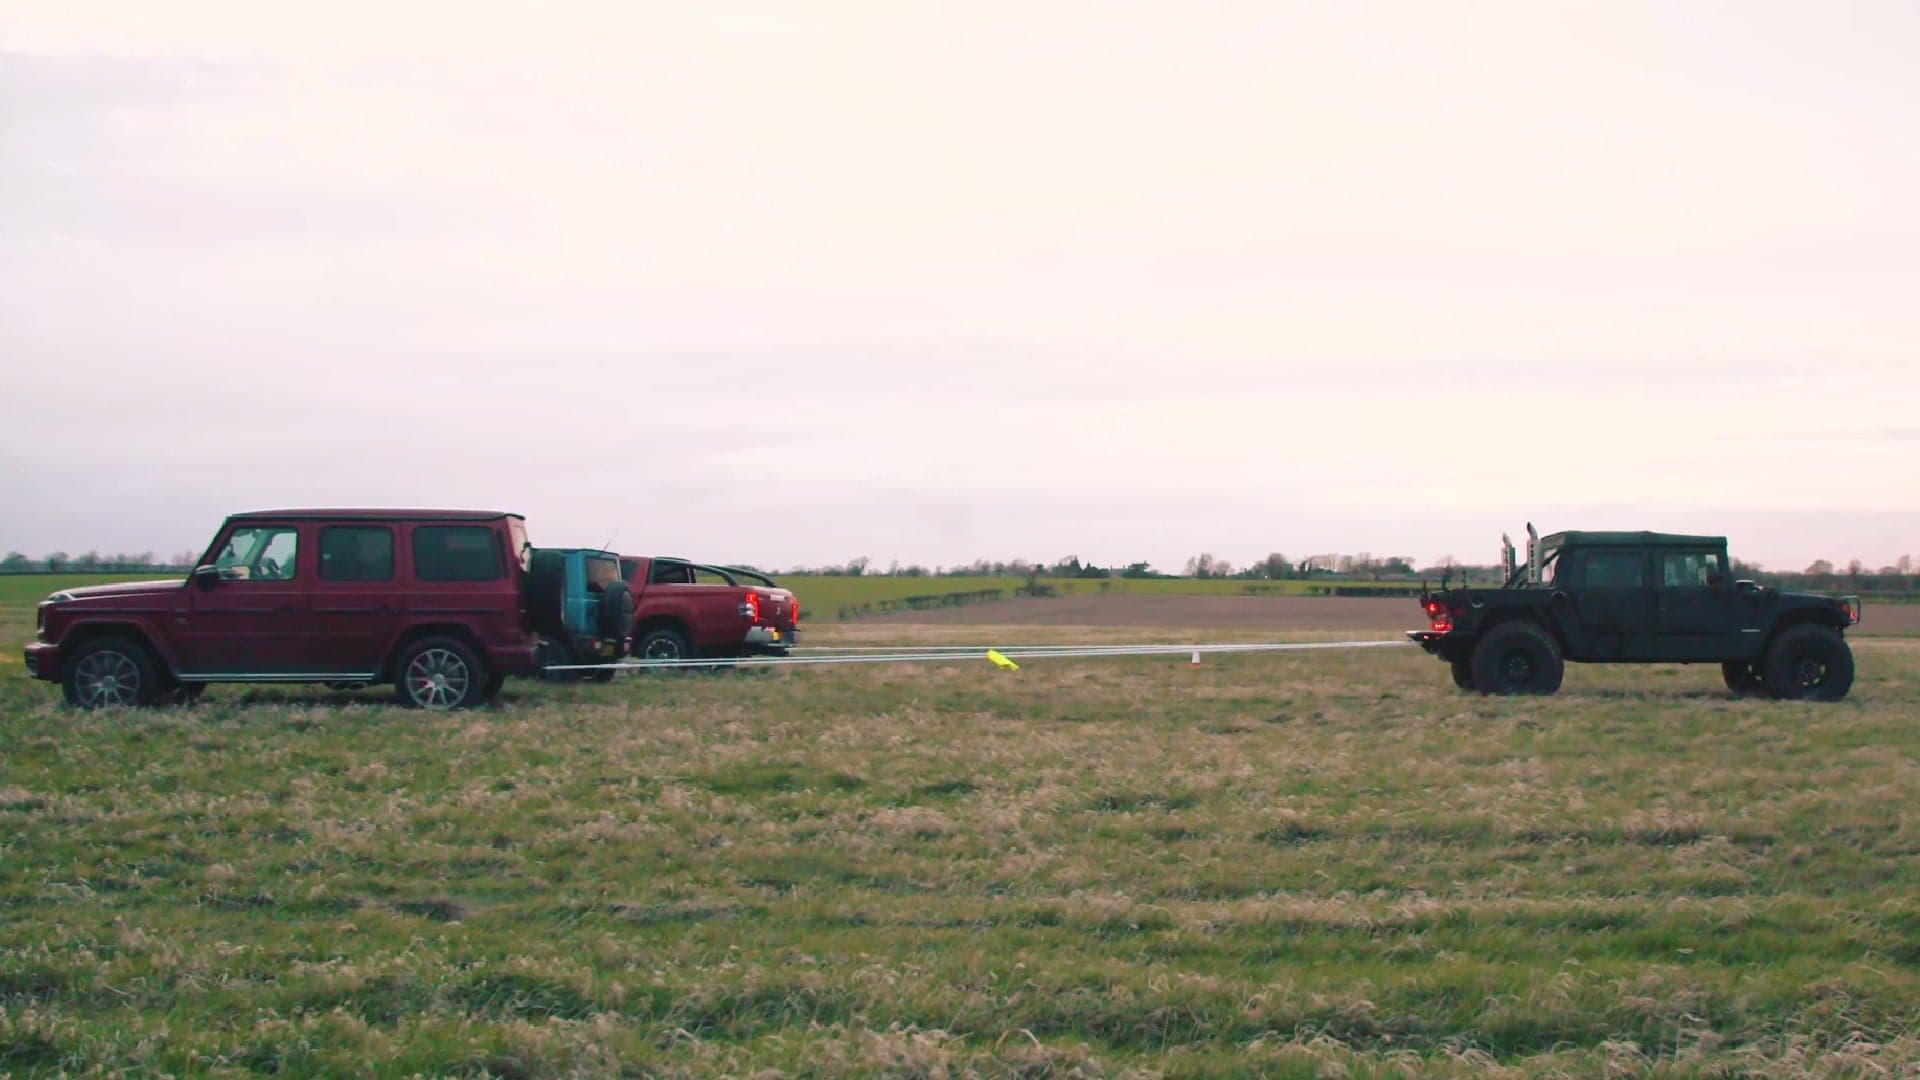 There’s No Match for a Brutish Hummer in This Three-on-One Tug of War